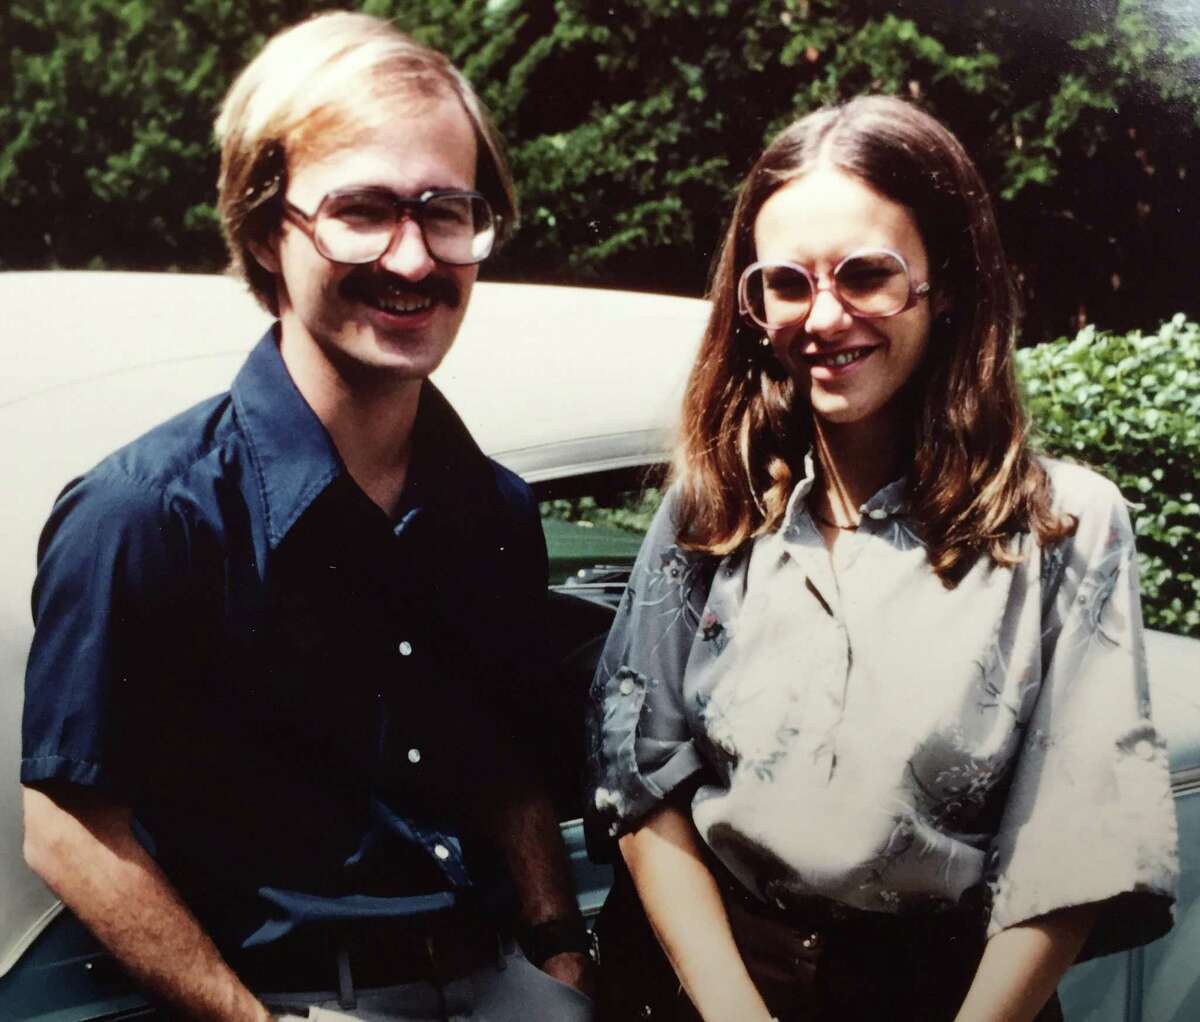 Bob and the Rev. Melinda Keck are shown in 1981, a year after moving from Pennsylvania to Danbury to start their careers. Bob began a career in the music department in the New Milford school system, and Melinda as a pastor at several local churches, including most recently the First Congregational Church of Kent.